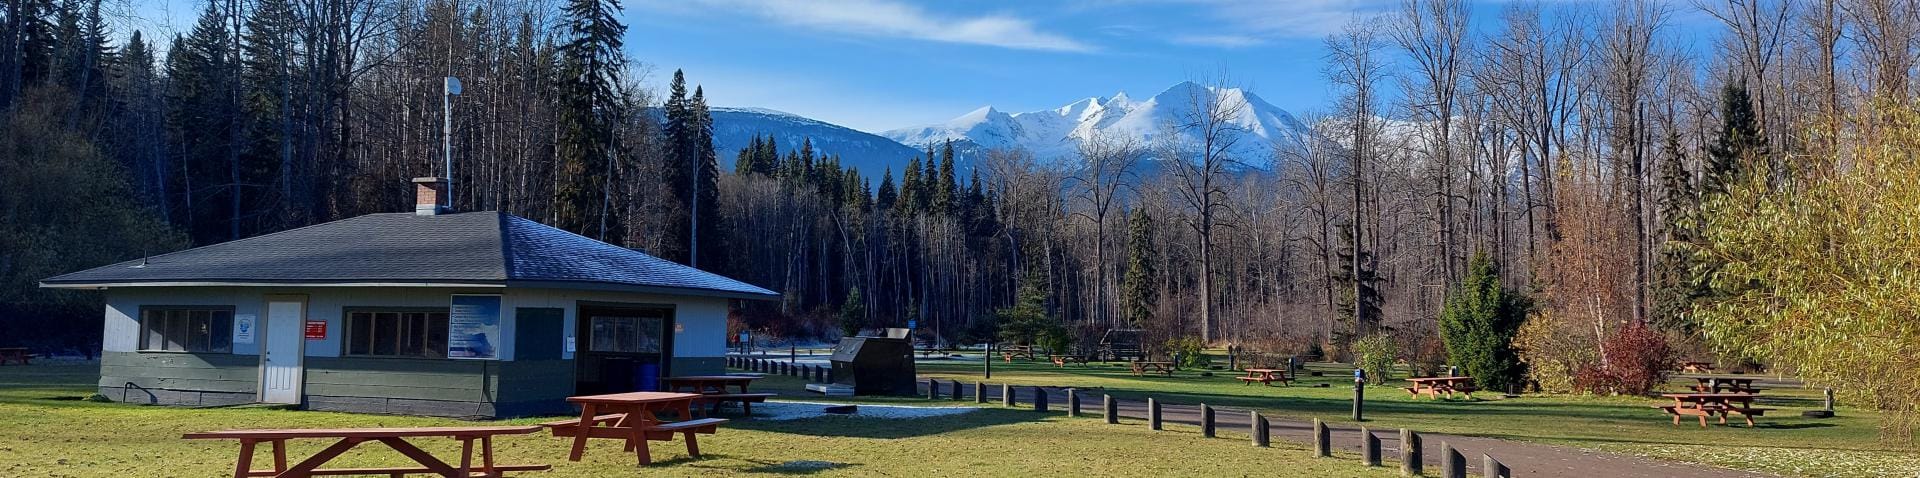 The Cookhouse and Hudson Bay Mountain from Riverside Municipal Campground